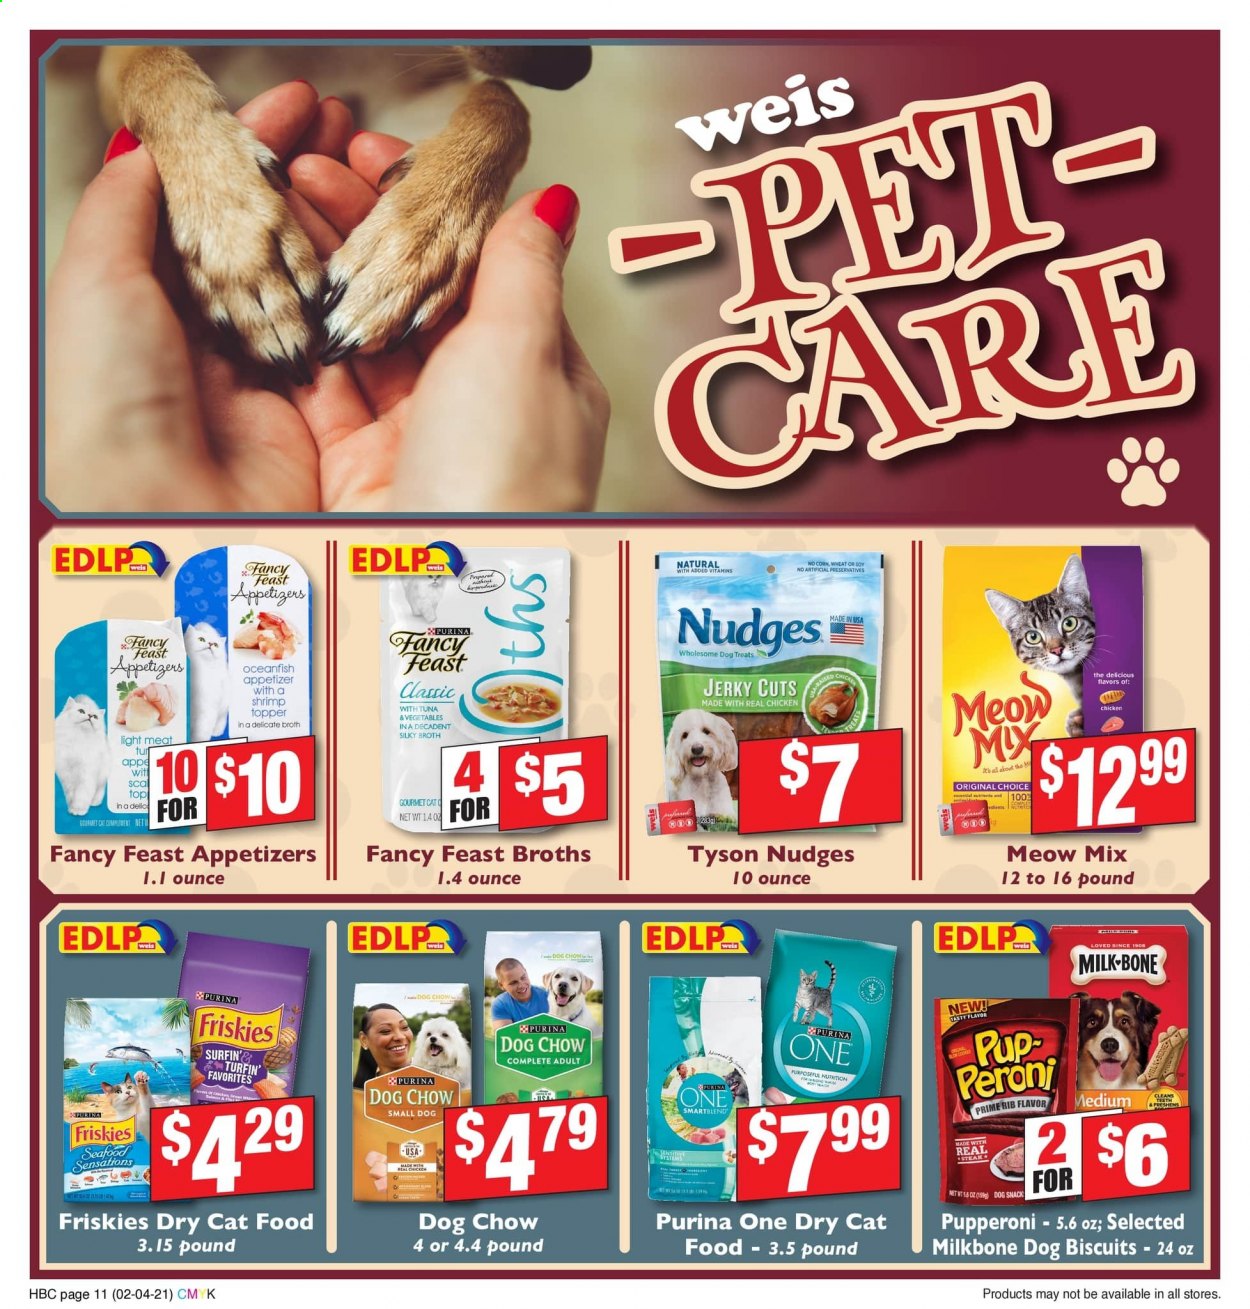 thumbnail - Weis Flyer - 02/04/2021 - 03/11/2021 - Sales products - steak, tuna, shrimps, jerky, milk, corn, snack, broth, Peroni, animal food, cat food, Dog Chow, Purina, dog biscuits, dry cat food, Meow Mix, Fancy Feast, Friskies. Page 10.